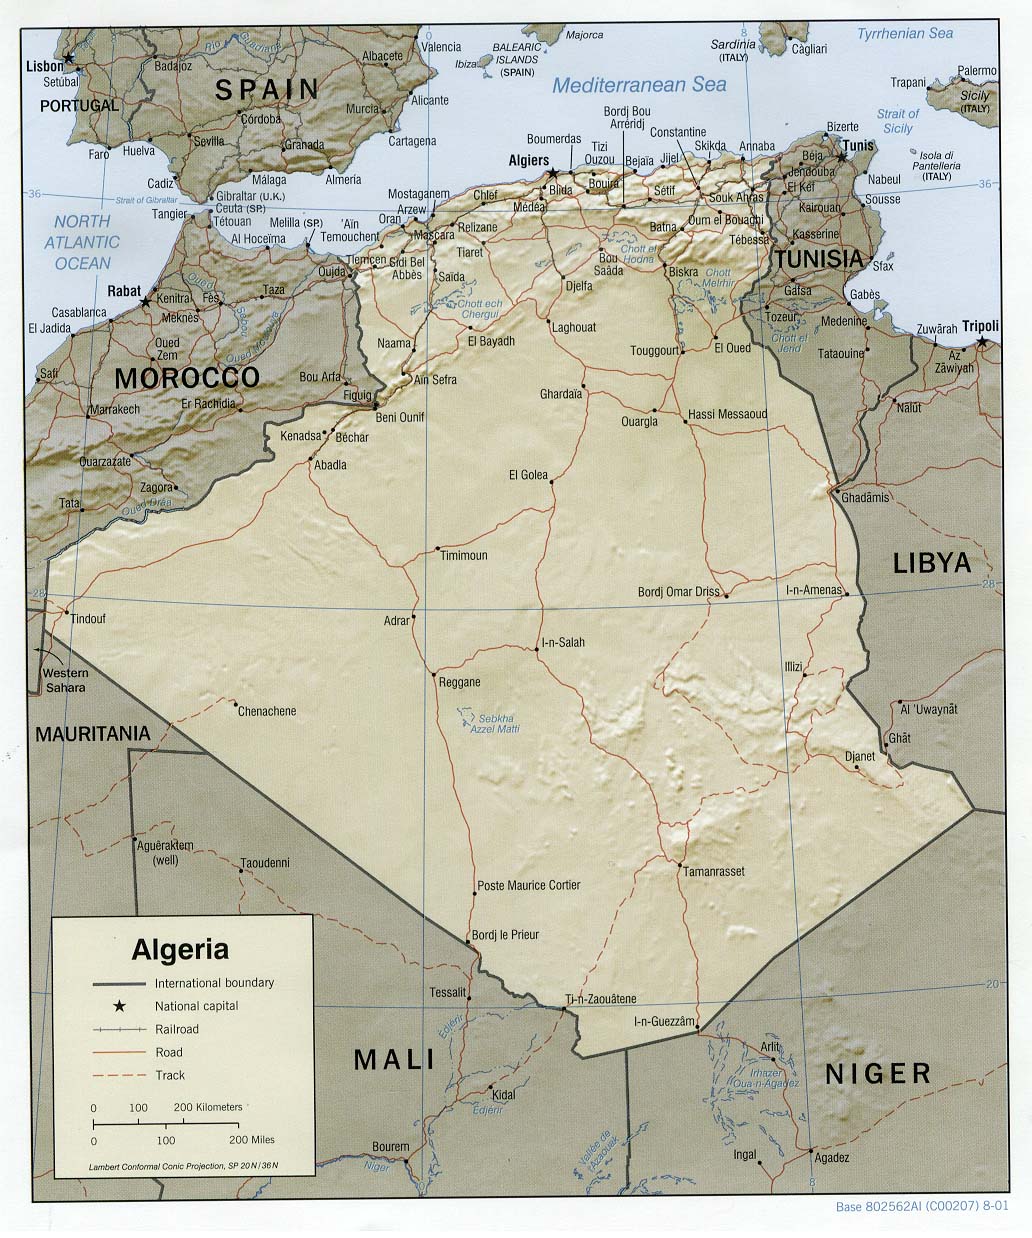 Ongoing Events in Algeria and Mali | UN For All